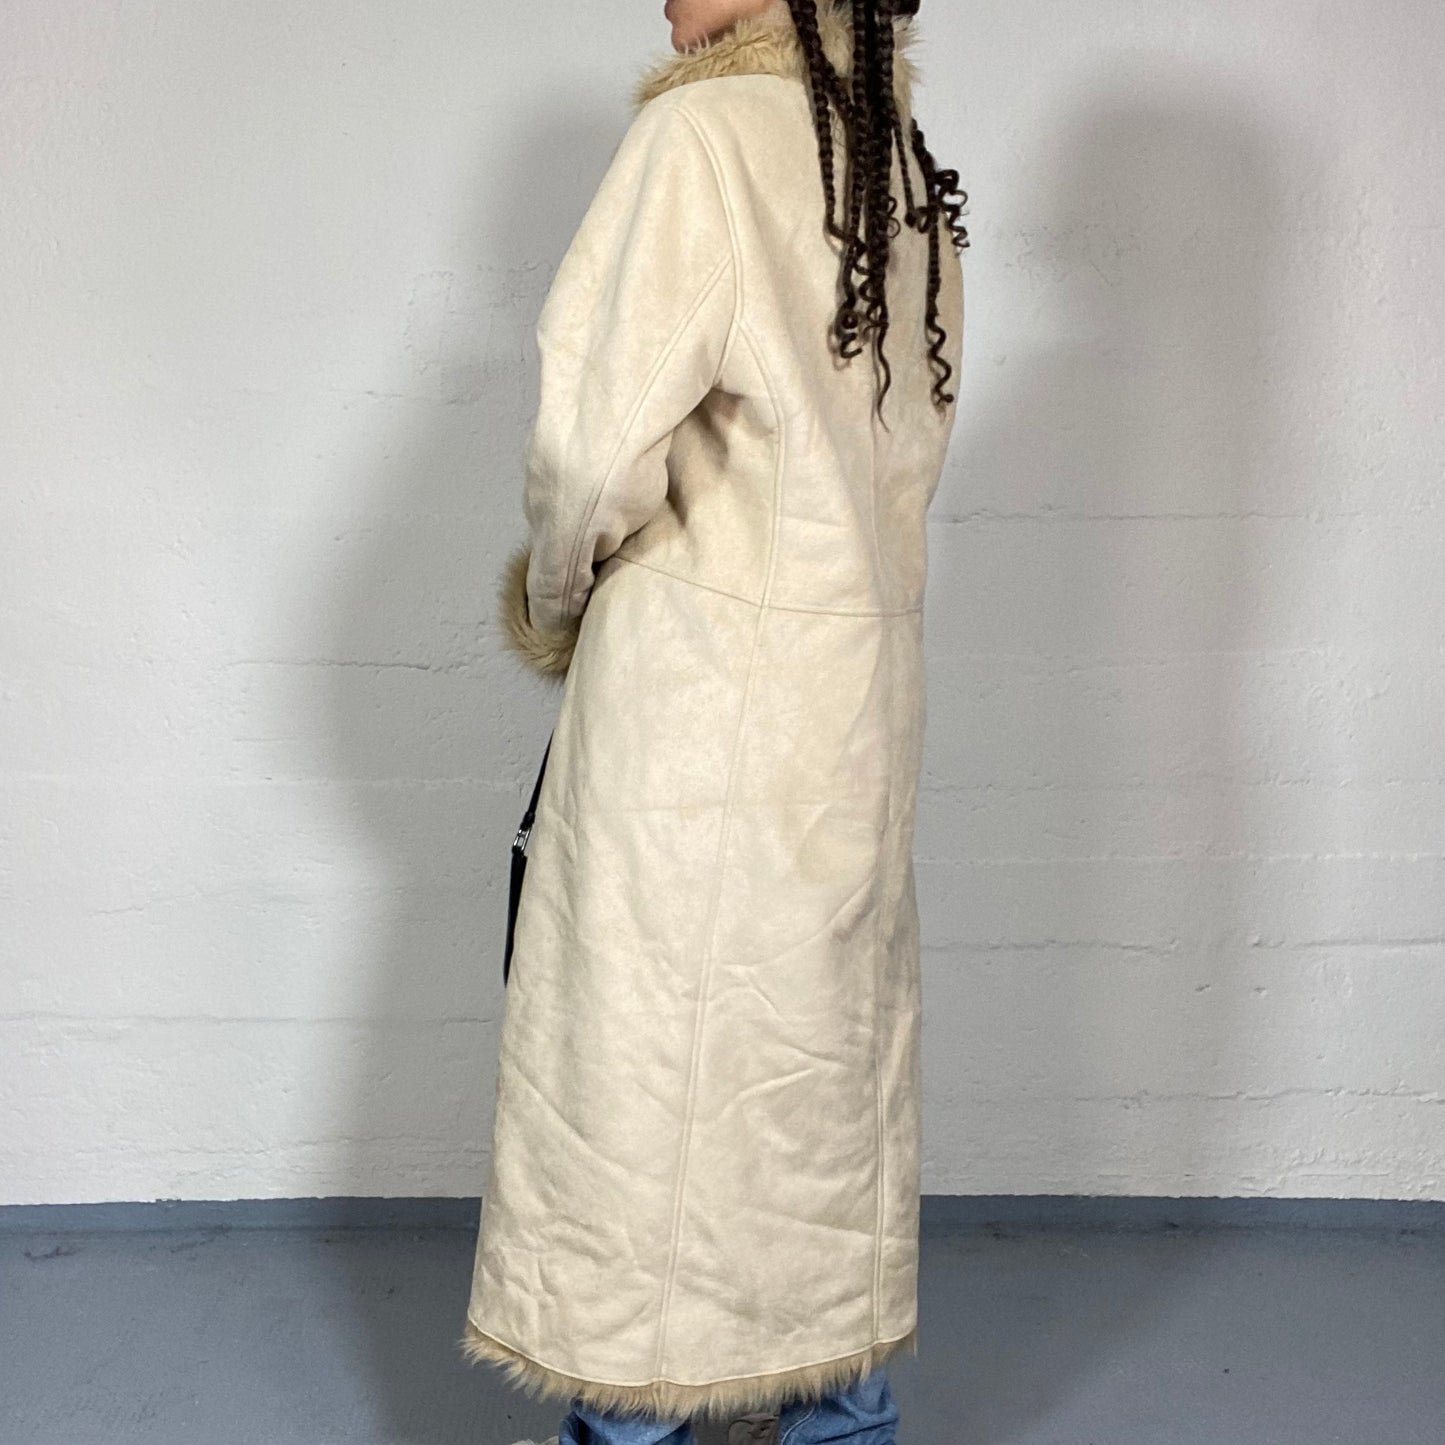 Vintage 2000's Bratz Beige Maxi Afghan Coat with Faux Fur Collar and Sleeves Detail (M)